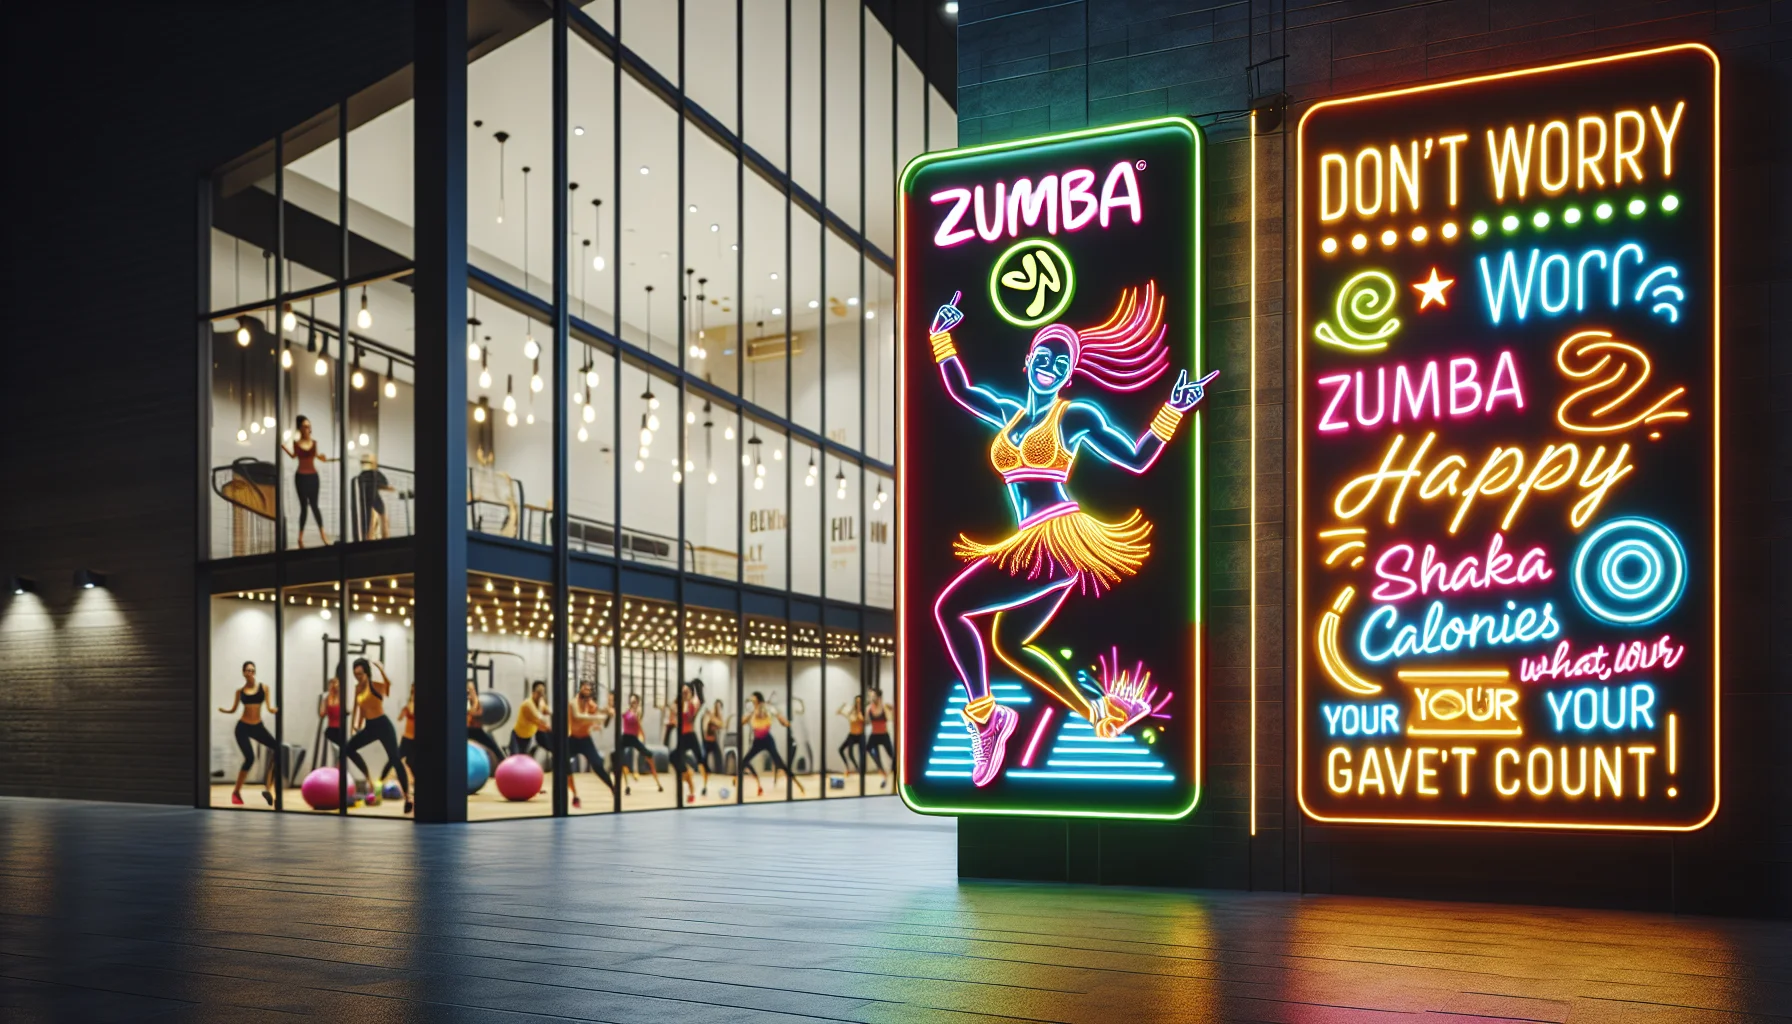 Create an entertaining and realistic image that showcases a neon signboard in the shape of a zumba dancer. This signboard is hanging outside of a lively gym with floor-to-ceiling glass windows, bright lights and fitness equipment in the background. The dancer on the signboard is animate, making classic Zumba moves with energy and rhythm. Around the dancer, there are various hilarious Zumba-themed quotes such as 'Don't Worry, Zumba Happy', 'Zumba Calories Don’t Count!', and 'Shake What Your Zumba Gave You!' These quotes are depicted creatively and humorously, intended to inspire people to enjoy exercising.